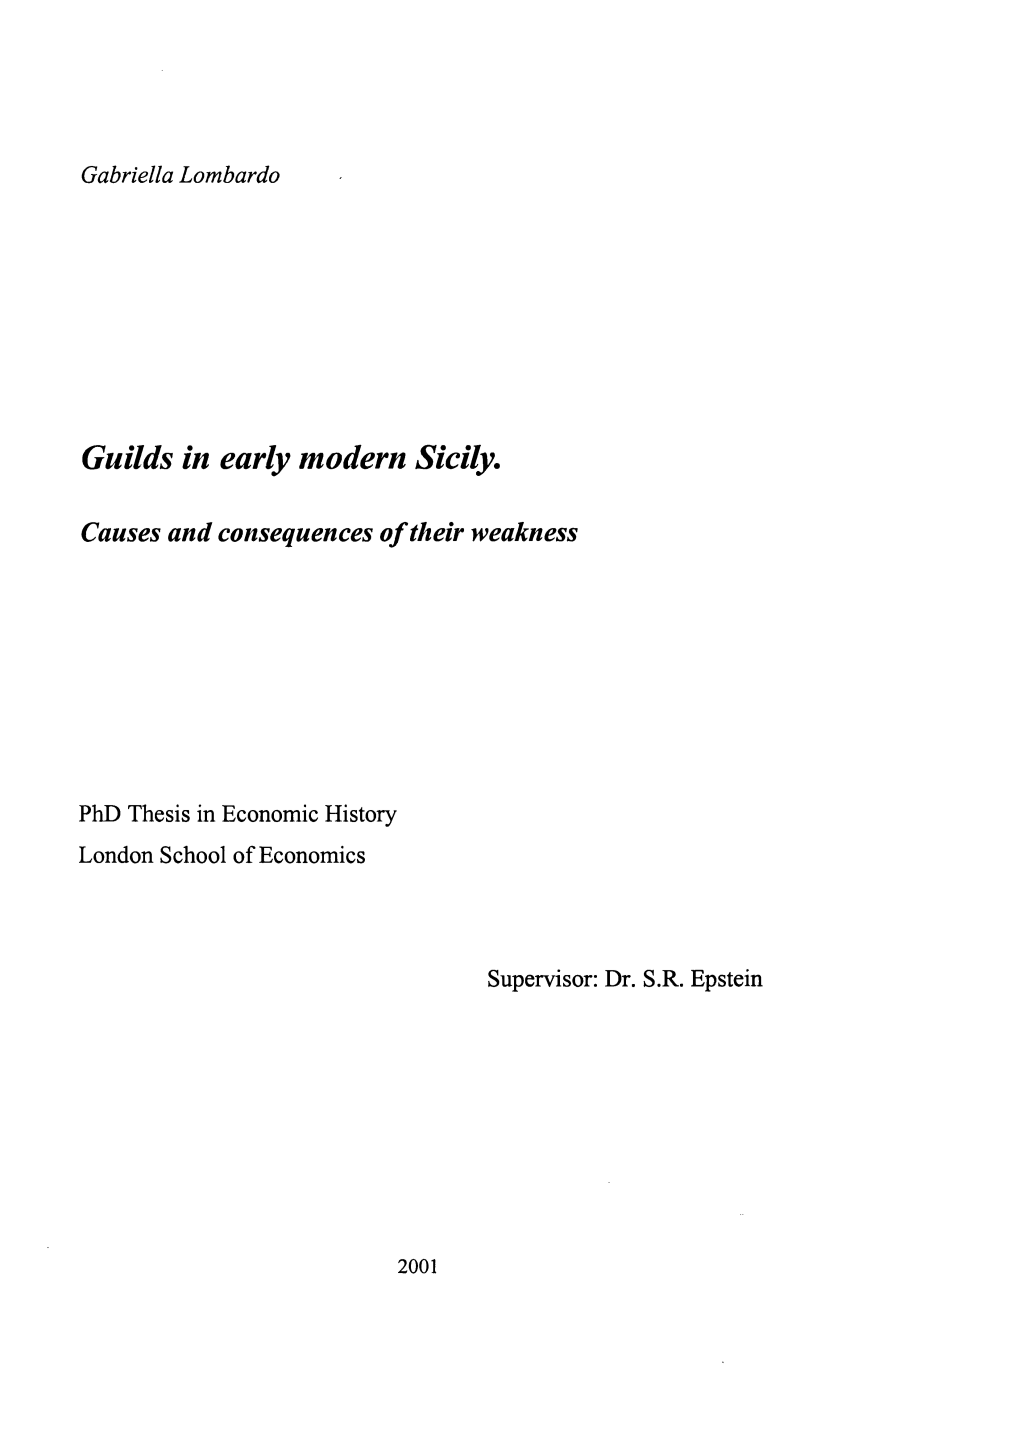 Guilds in Early Modern Sicily